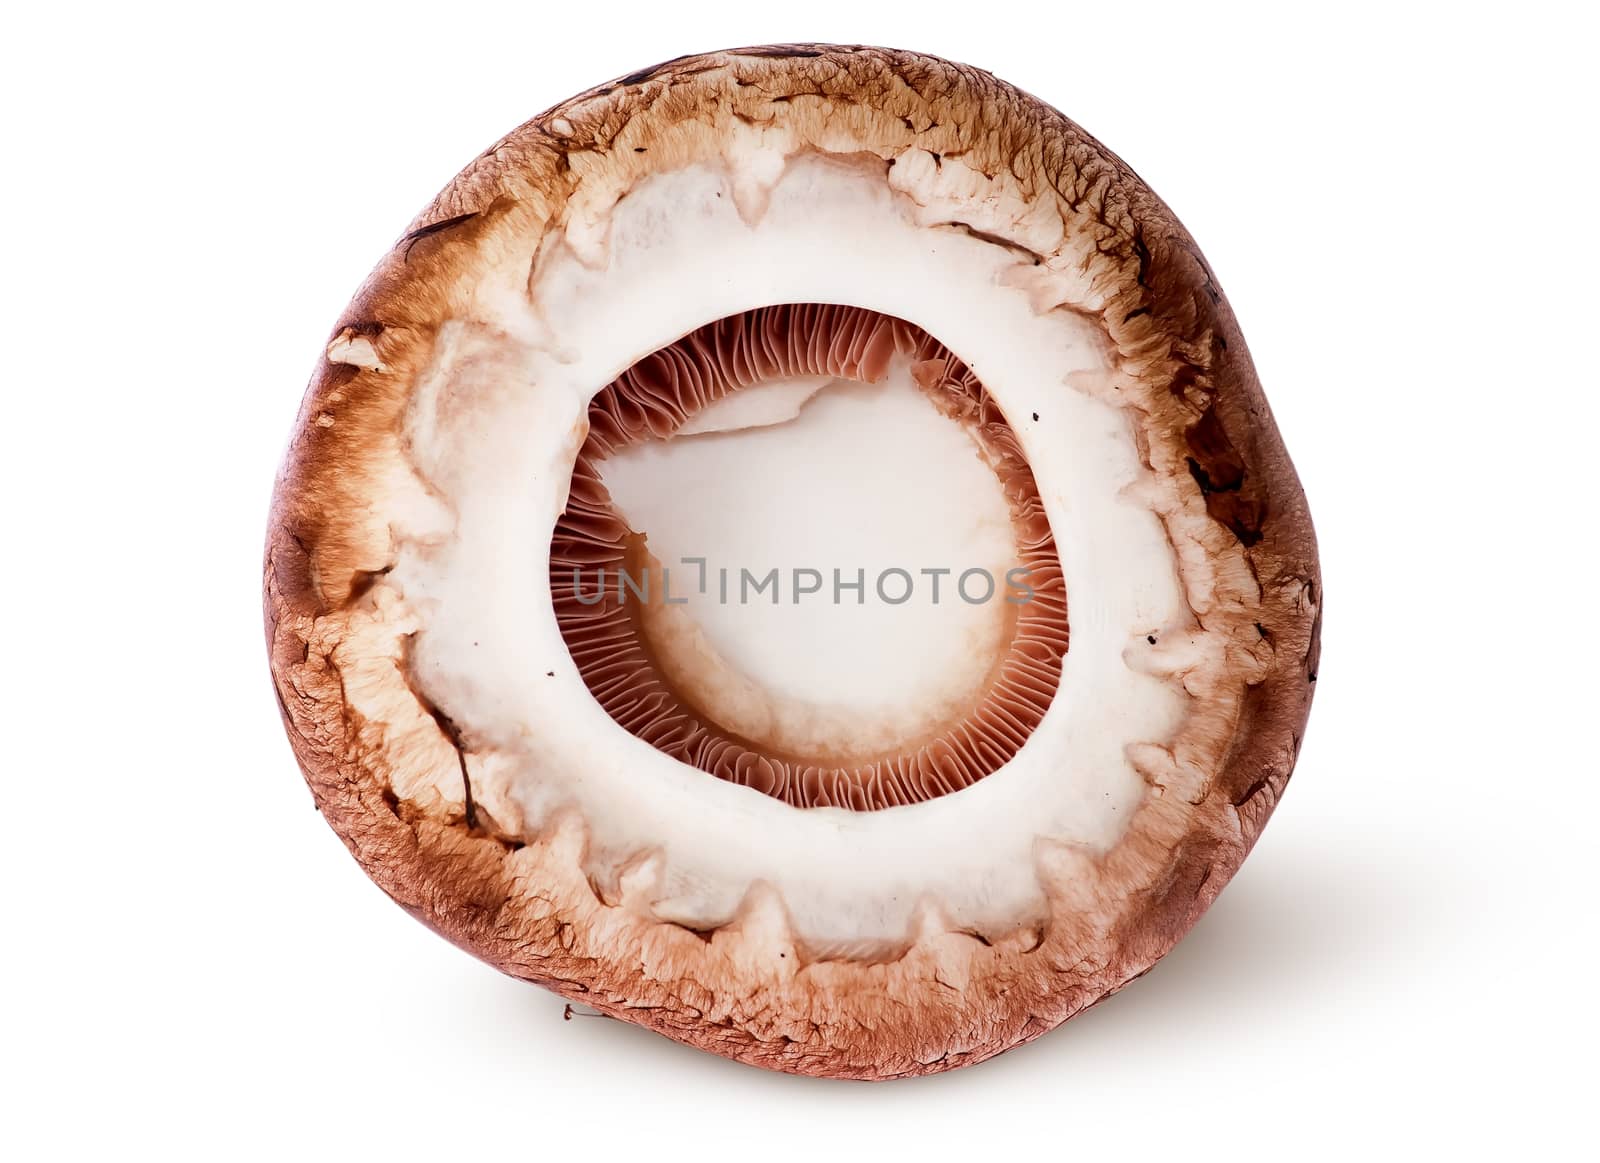 Cap on a brown champignon isolated on white background